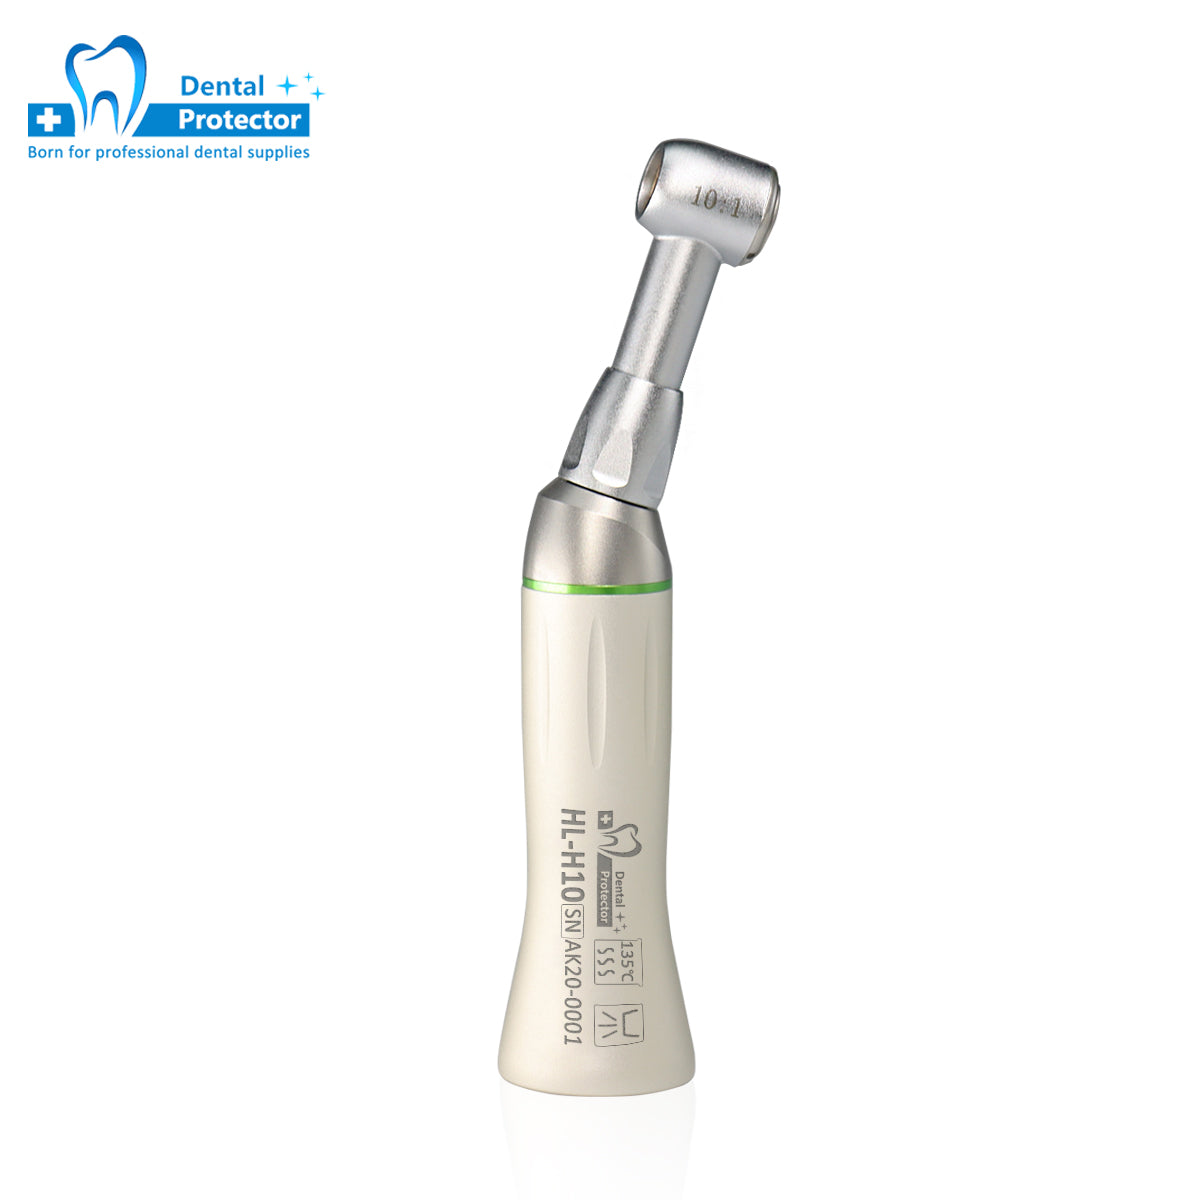 Dental 10:1 Contra Angle HL-H10 Low Speed Handpiece Push Dental Handpiece Air Turbine Hand Use File